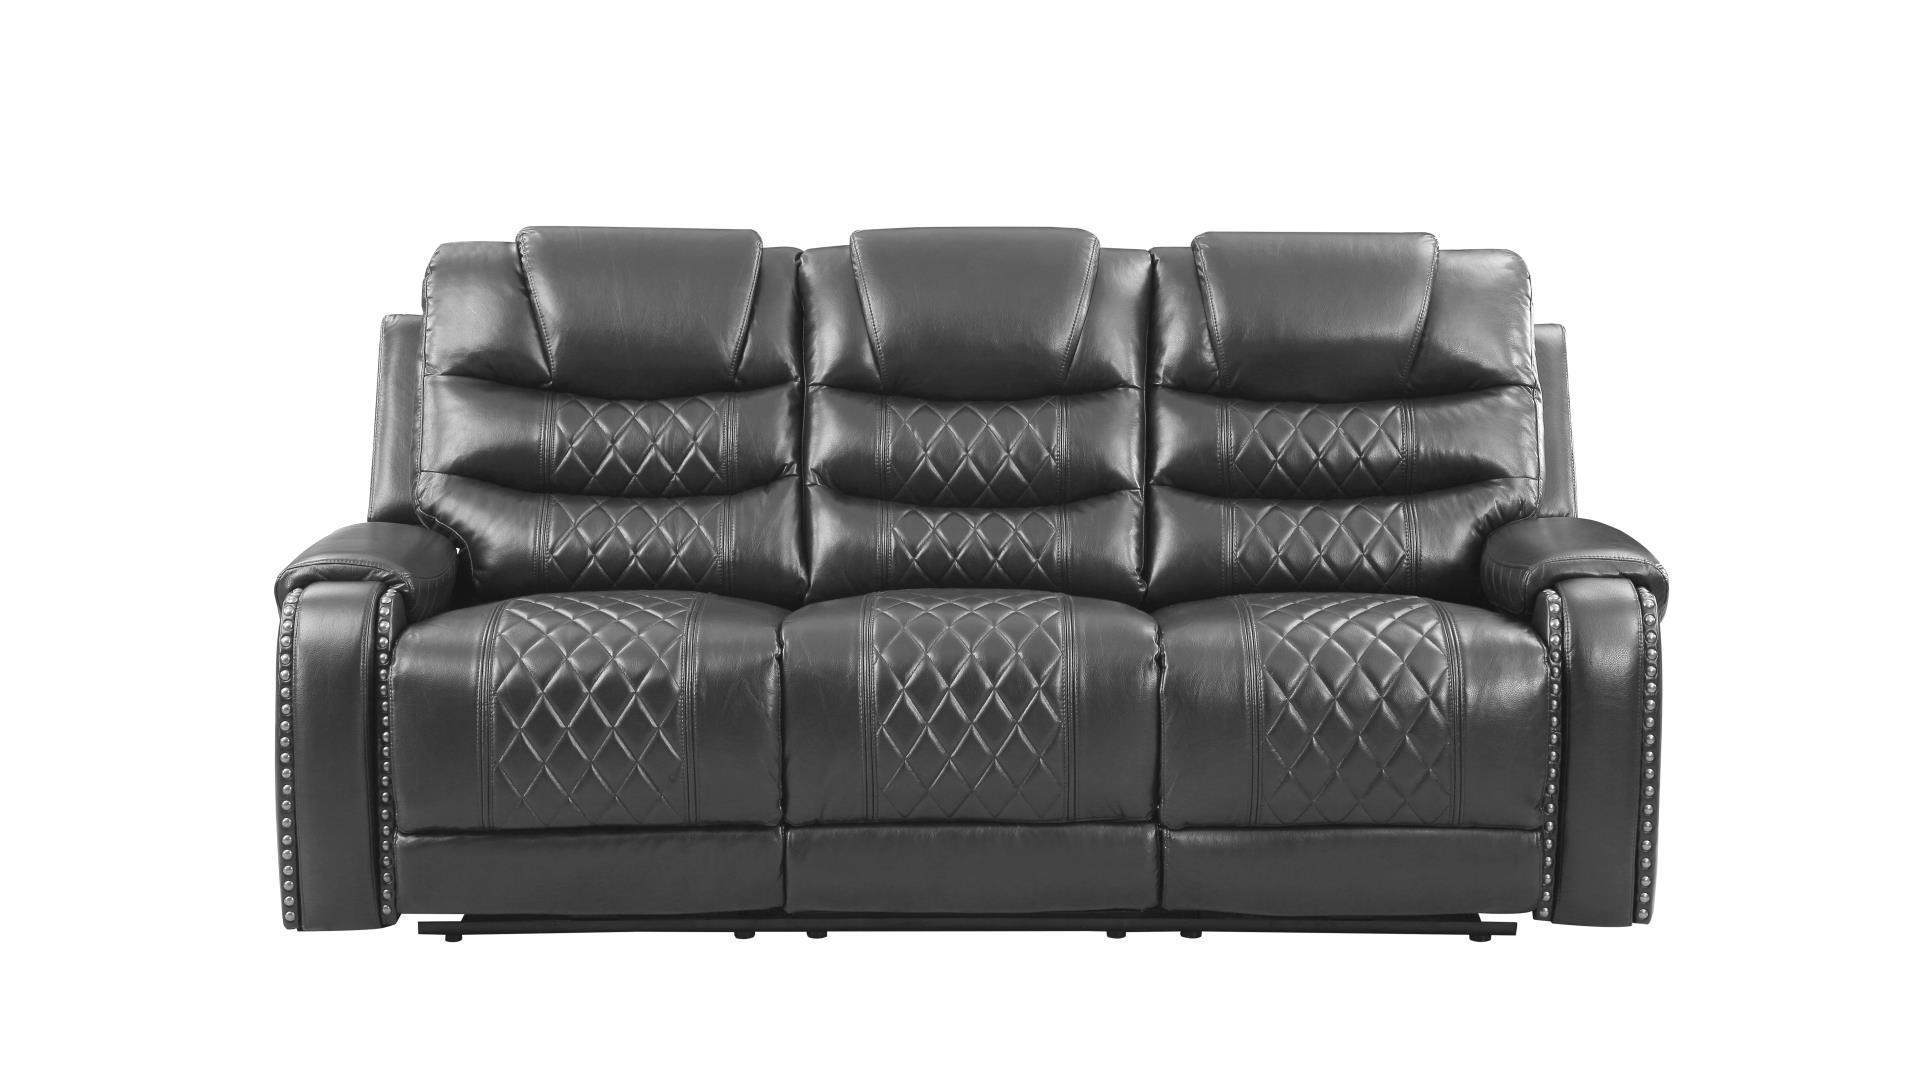 Galaxy Home Furniture TENNESSEE-GR Recliner Sofa